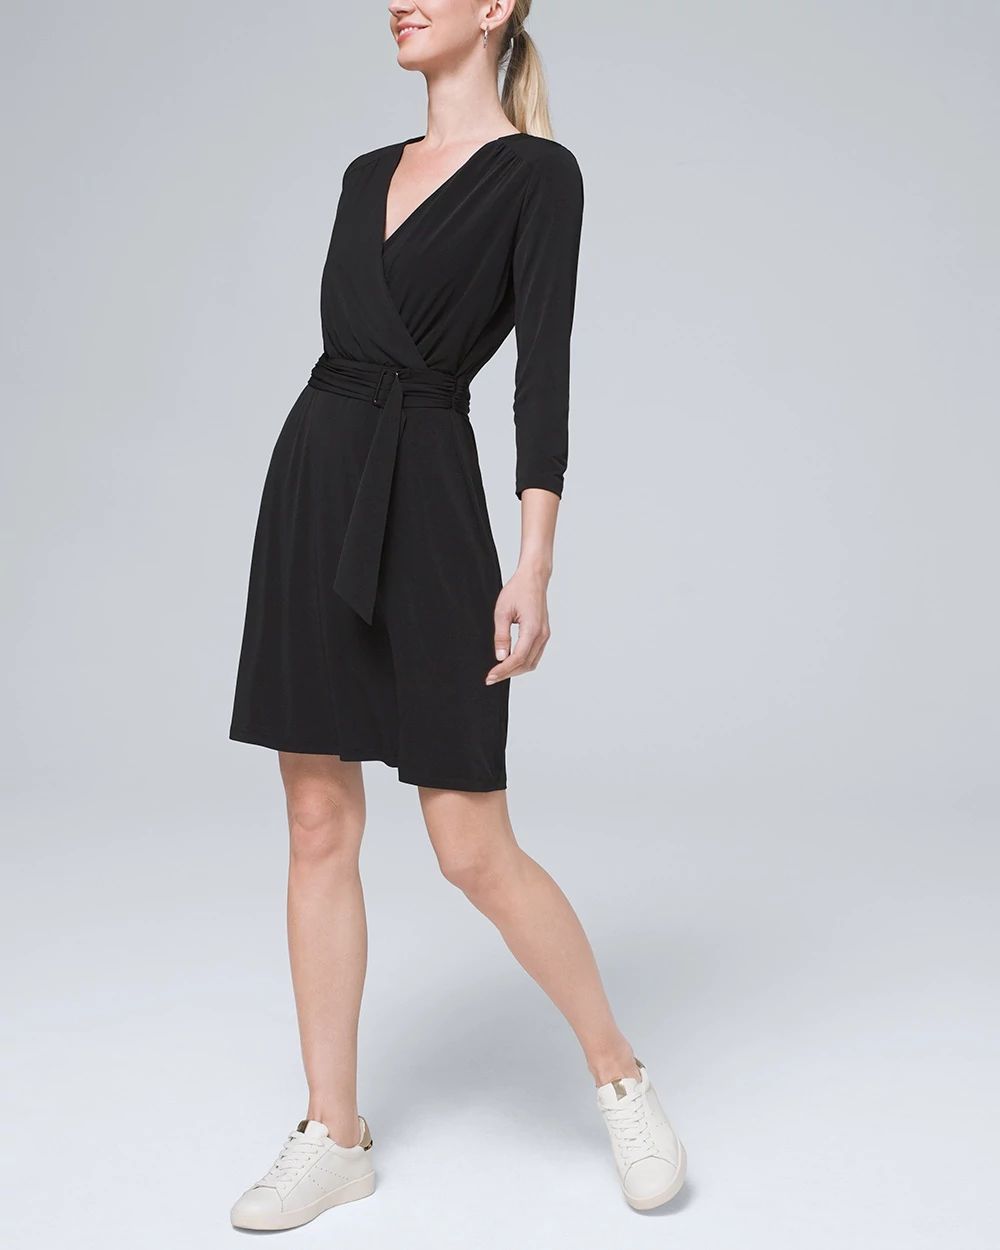 Petite Matte Jersey Belted Surplice Dress click to view larger image.